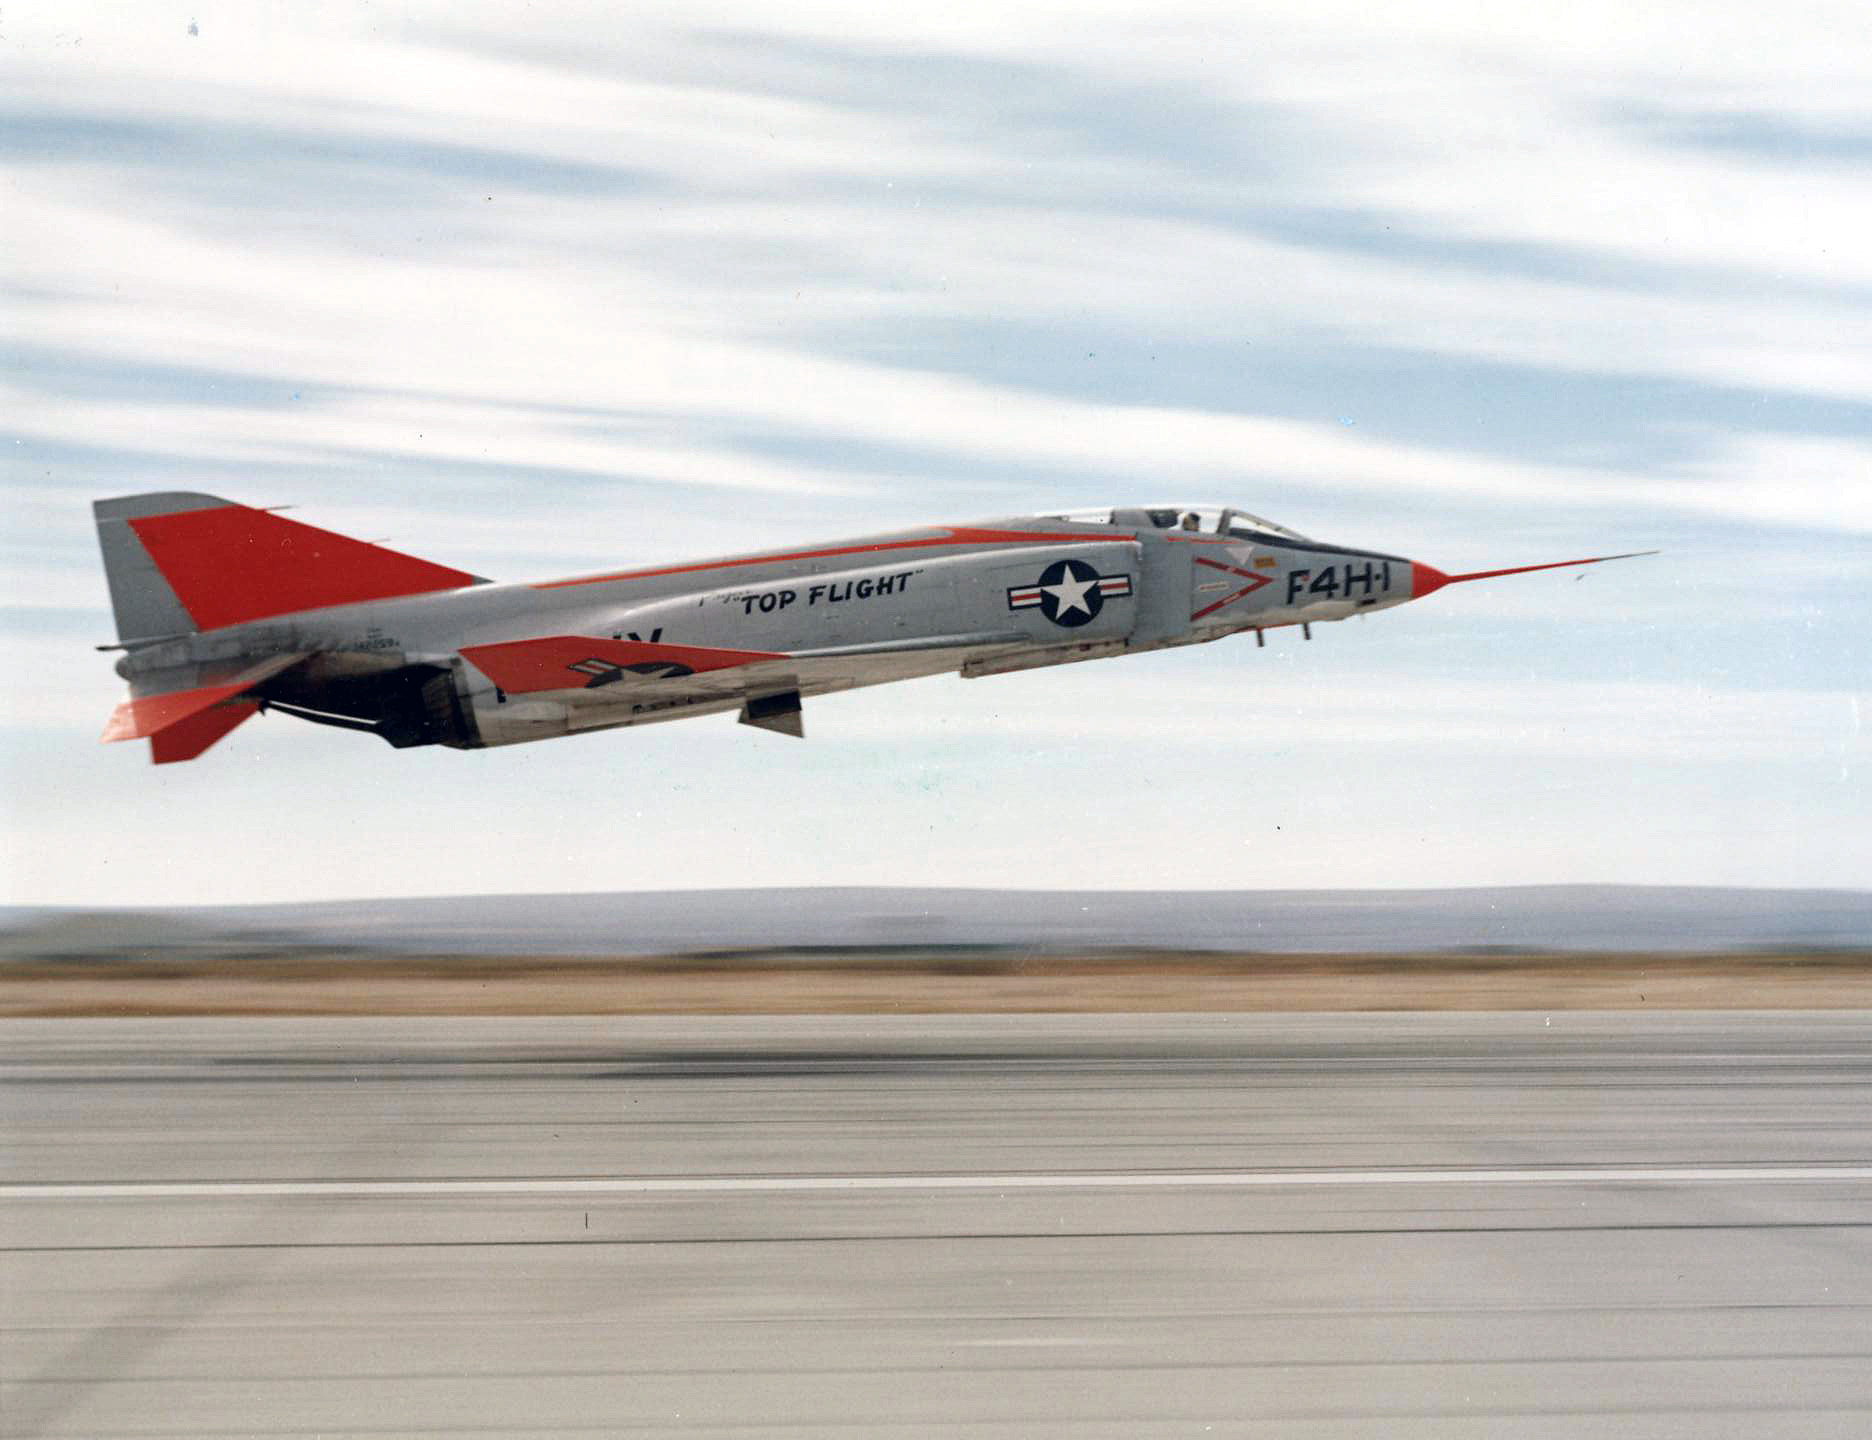 McDonnell YF4H-1 Phantom II, Bu. No. 142260, takes off at Edwards Air Force Base, during Project Top Flight. (U.S. Navy)